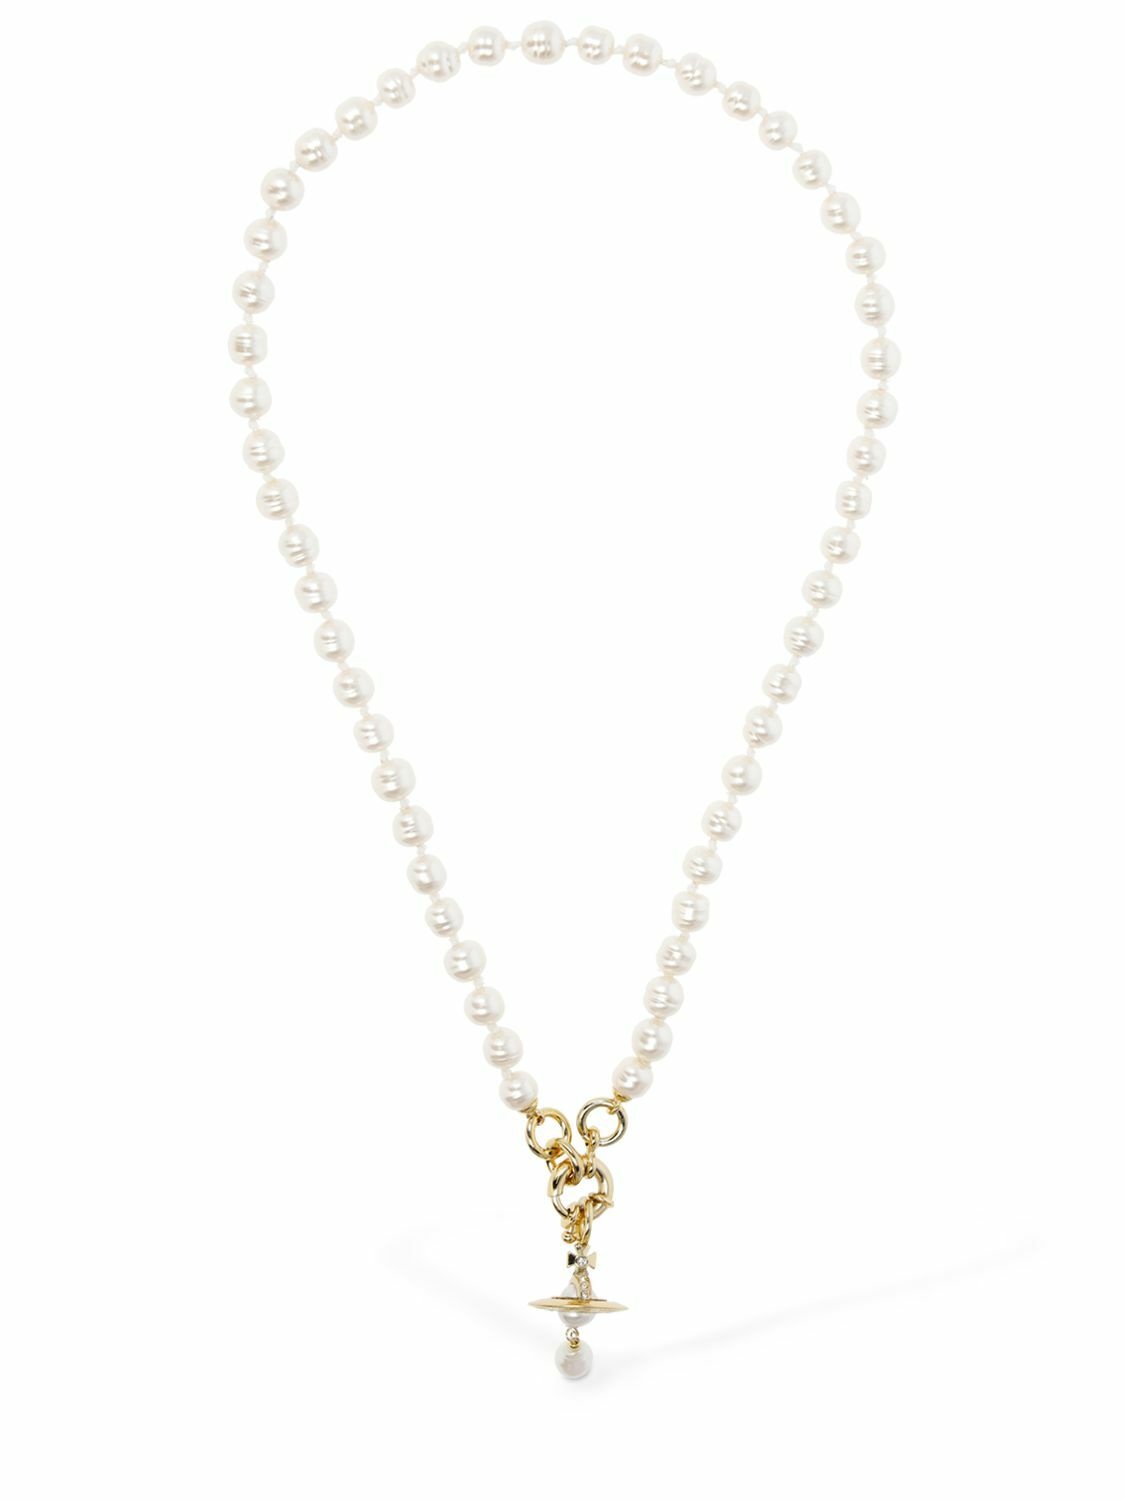 Vivienne Westwood Brooken pearl necklace Silver - Jewelry